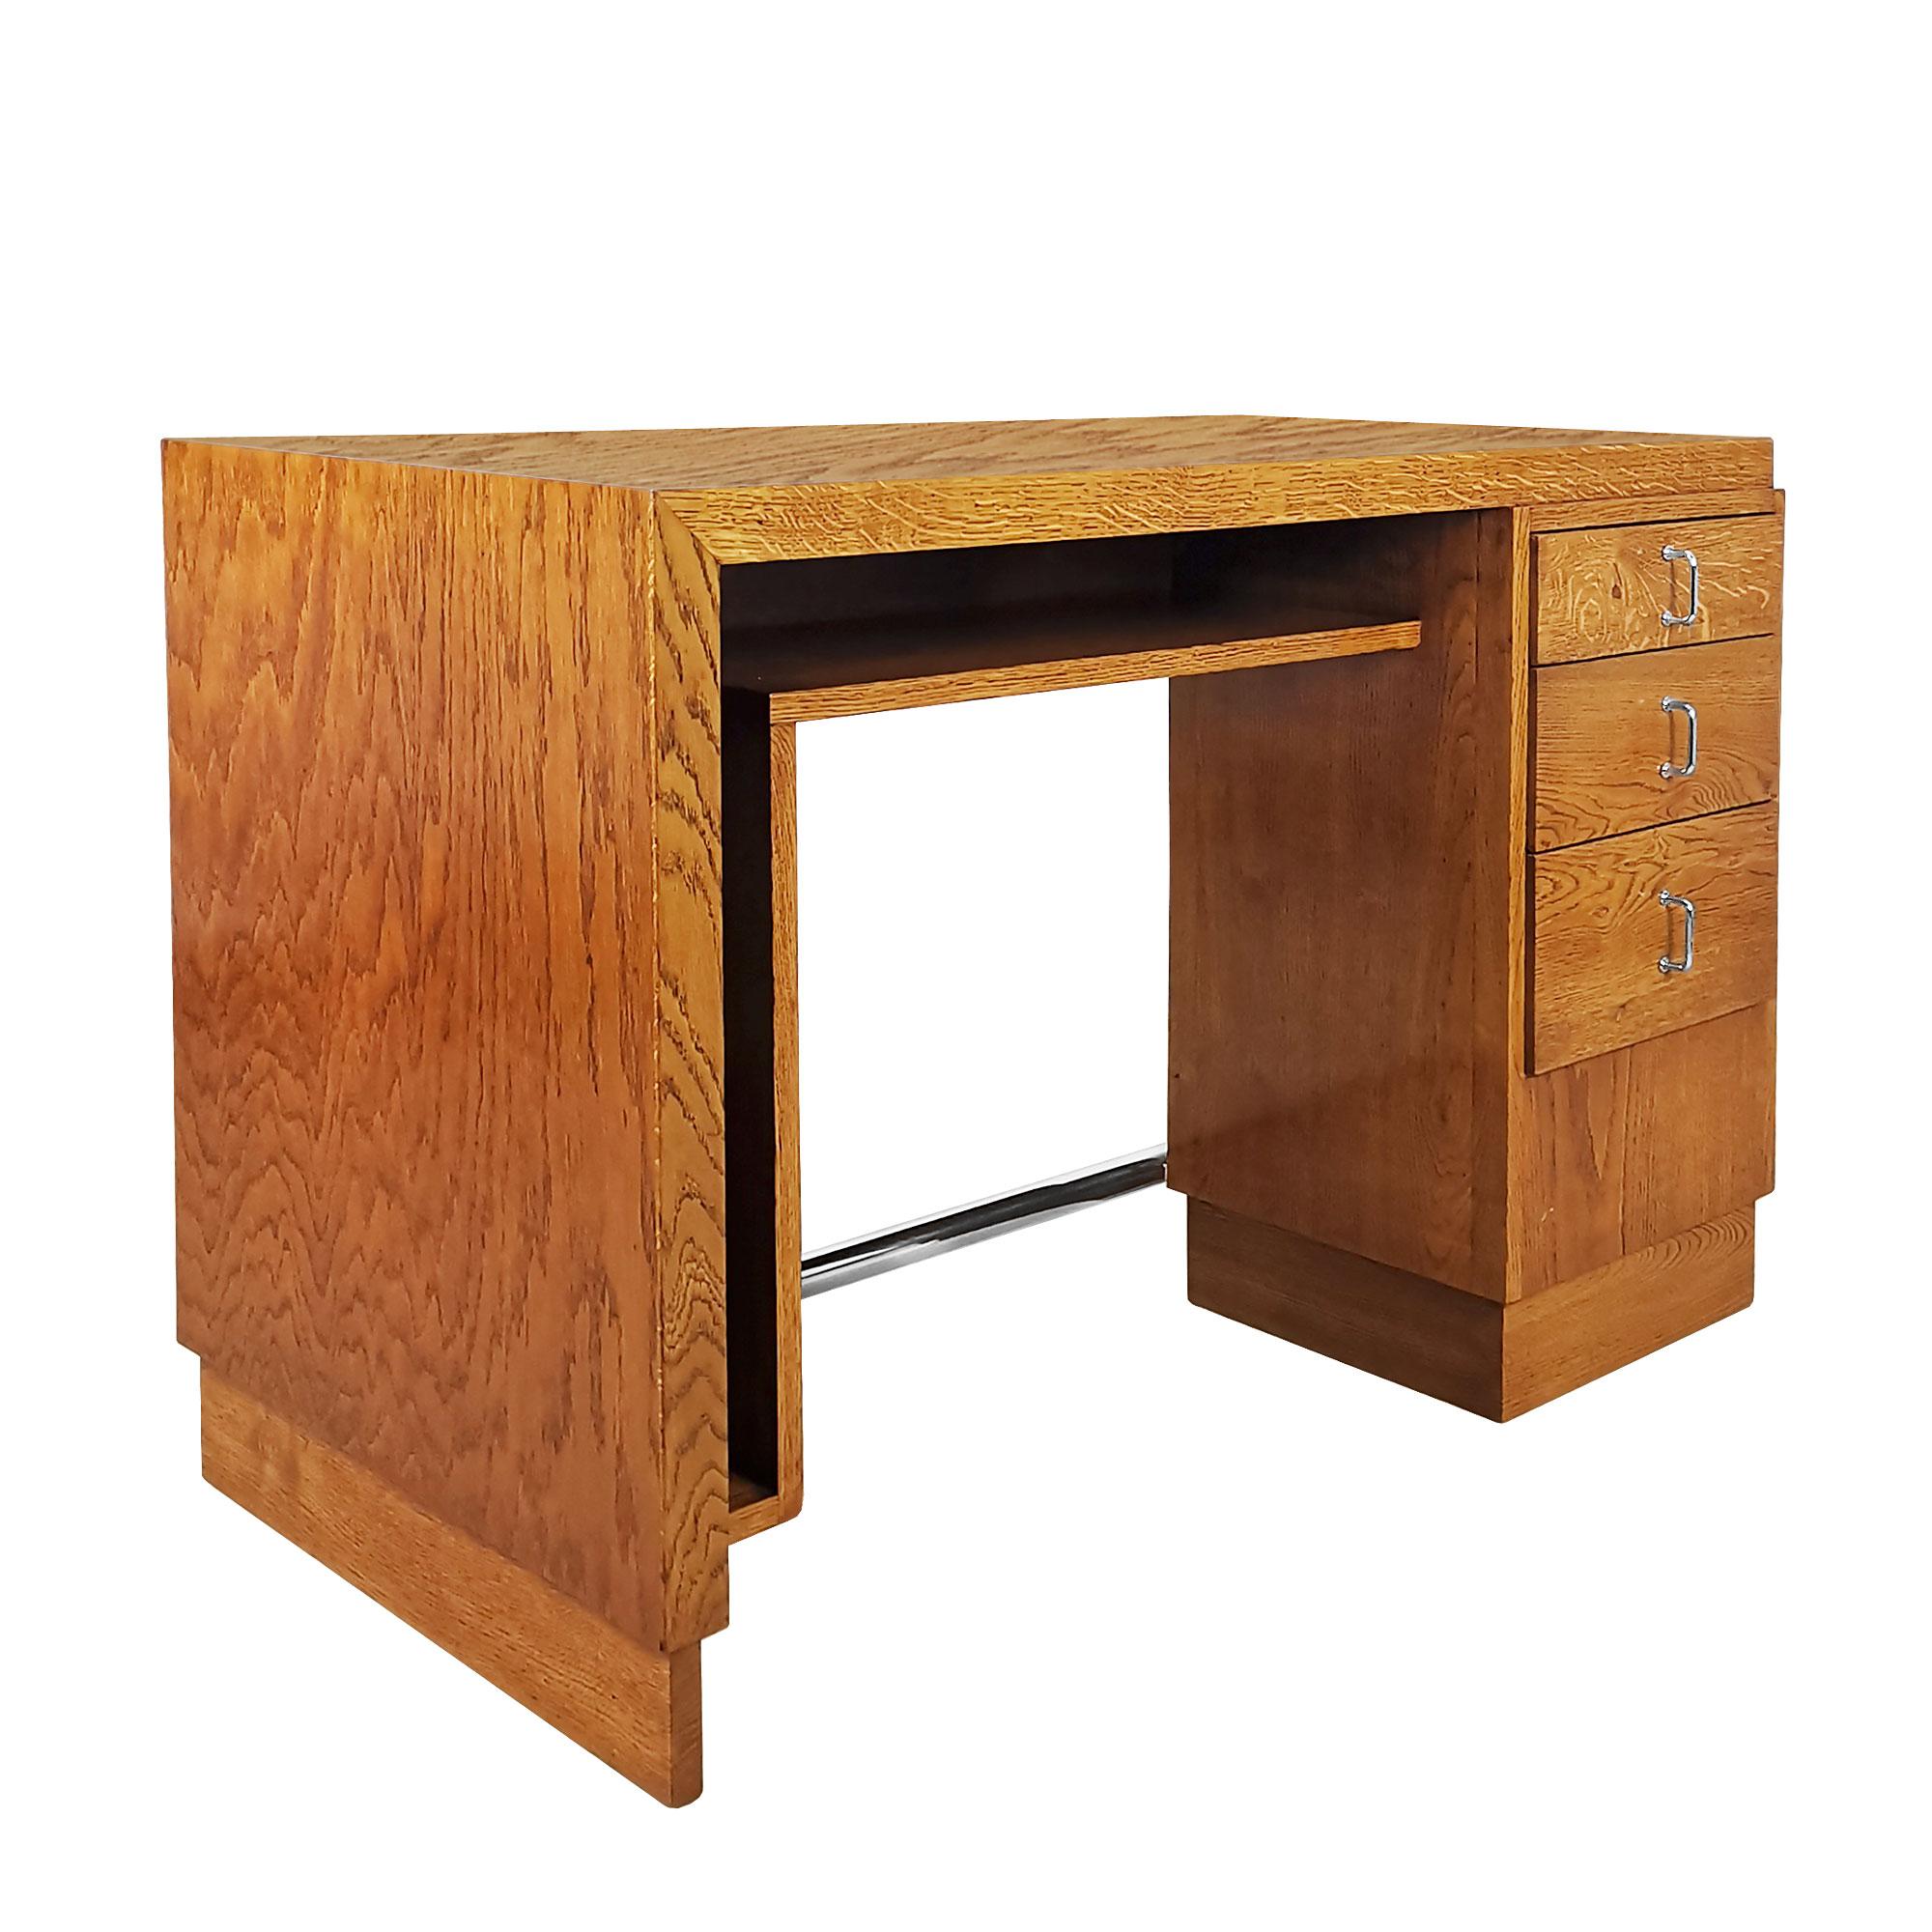 Small Art Deco Cubist Desk in Solid Oak The Style Francisque Chaleyssin- France For Sale 1